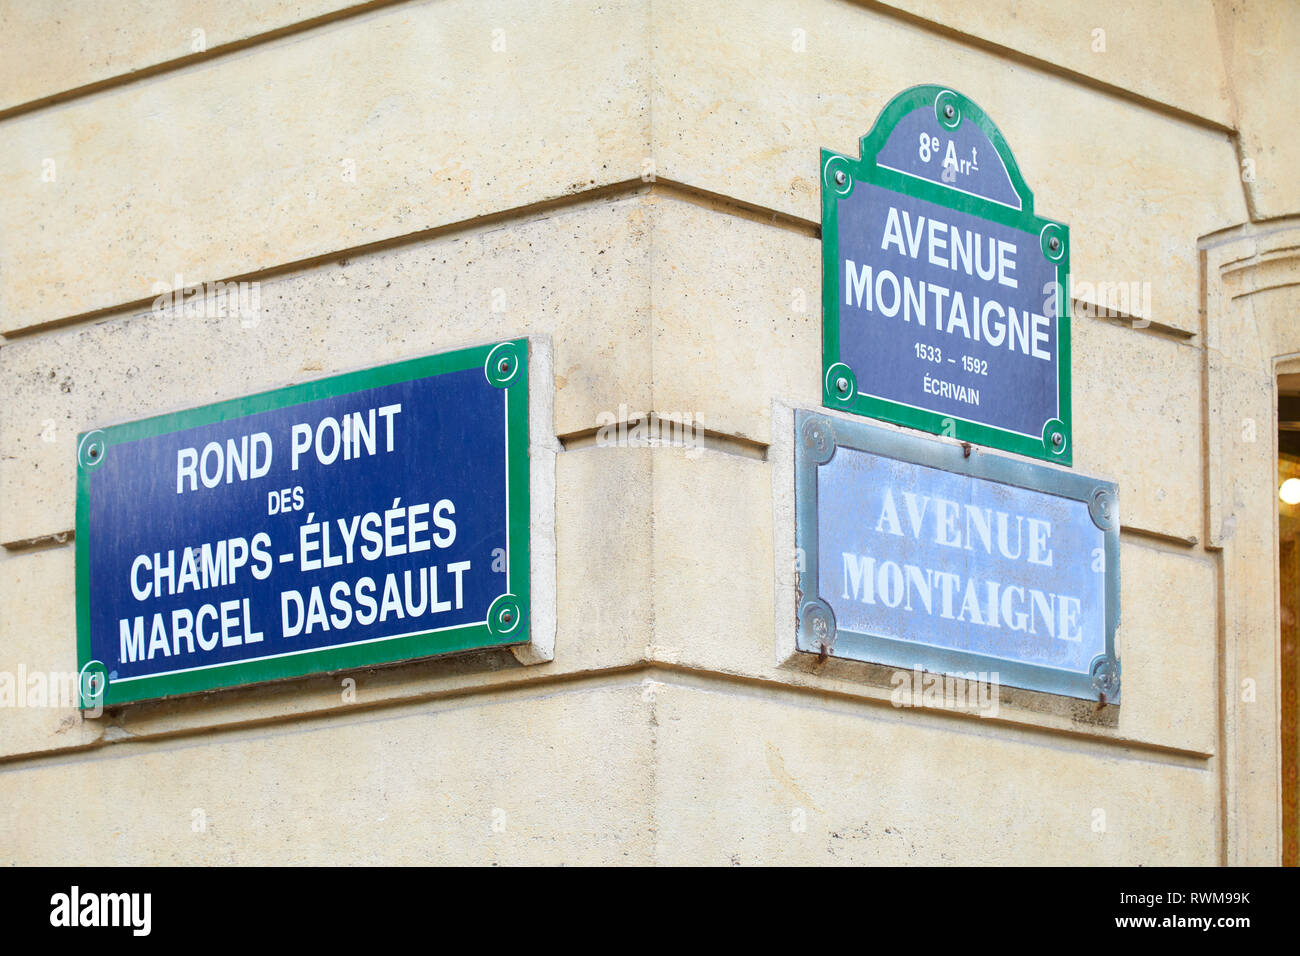 PARIS, FRANCE - JULY 22, 2017: Famous Champs Elysees and Avenue Montaigne corner and street signs in Paris, France. Stock Photo